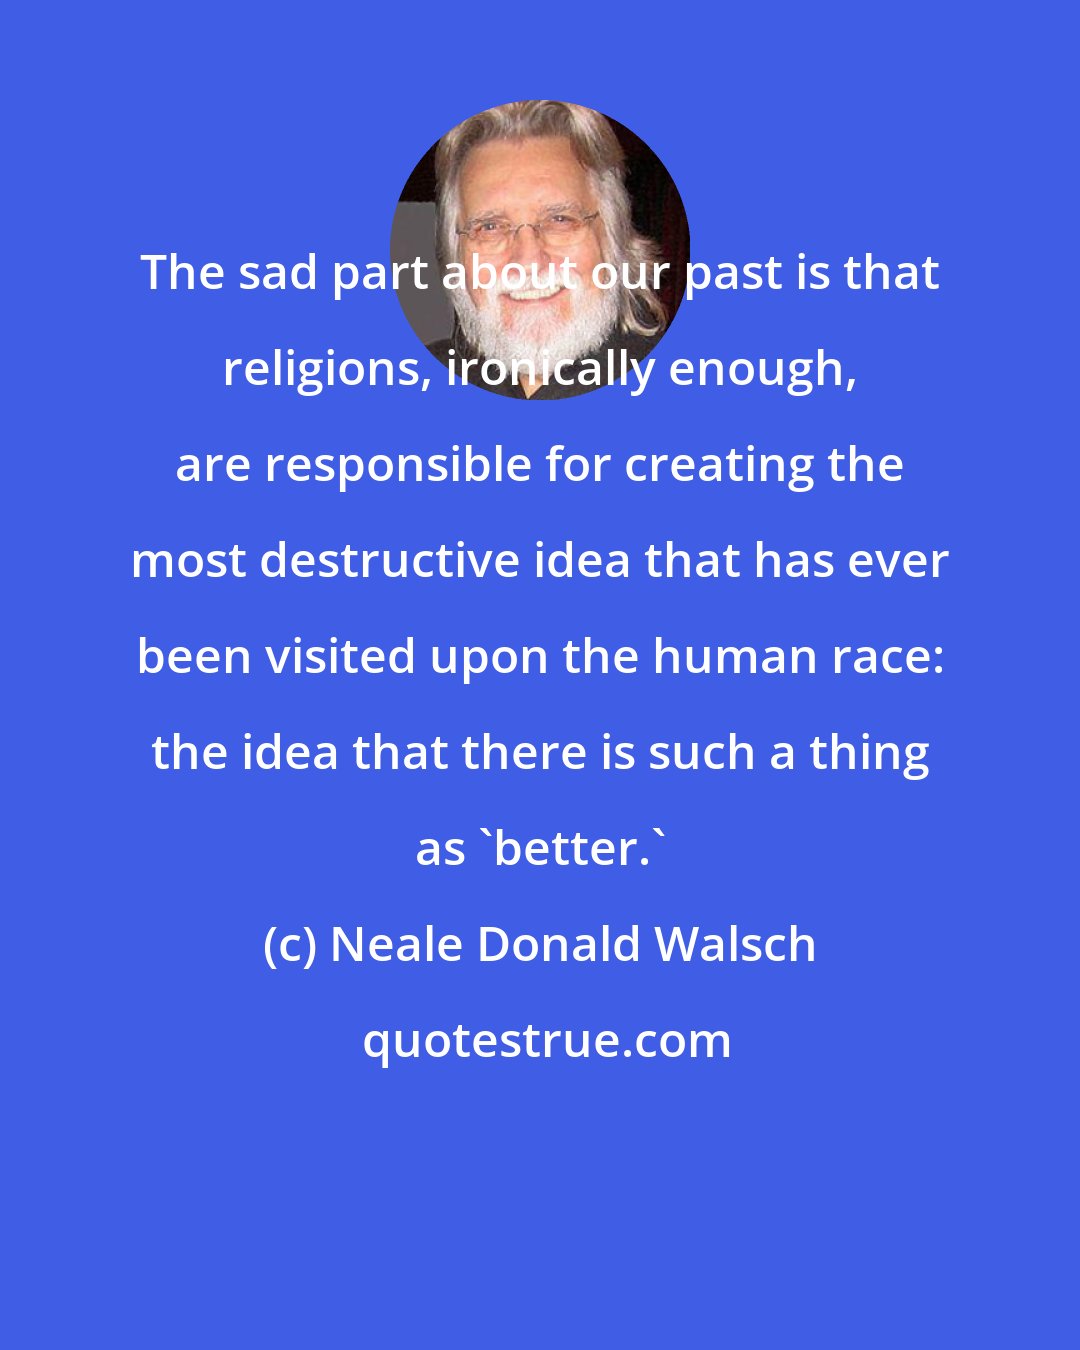 Neale Donald Walsch: The sad part about our past is that religions, ironically enough, are responsible for creating the most destructive idea that has ever been visited upon the human race: the idea that there is such a thing as 'better.'